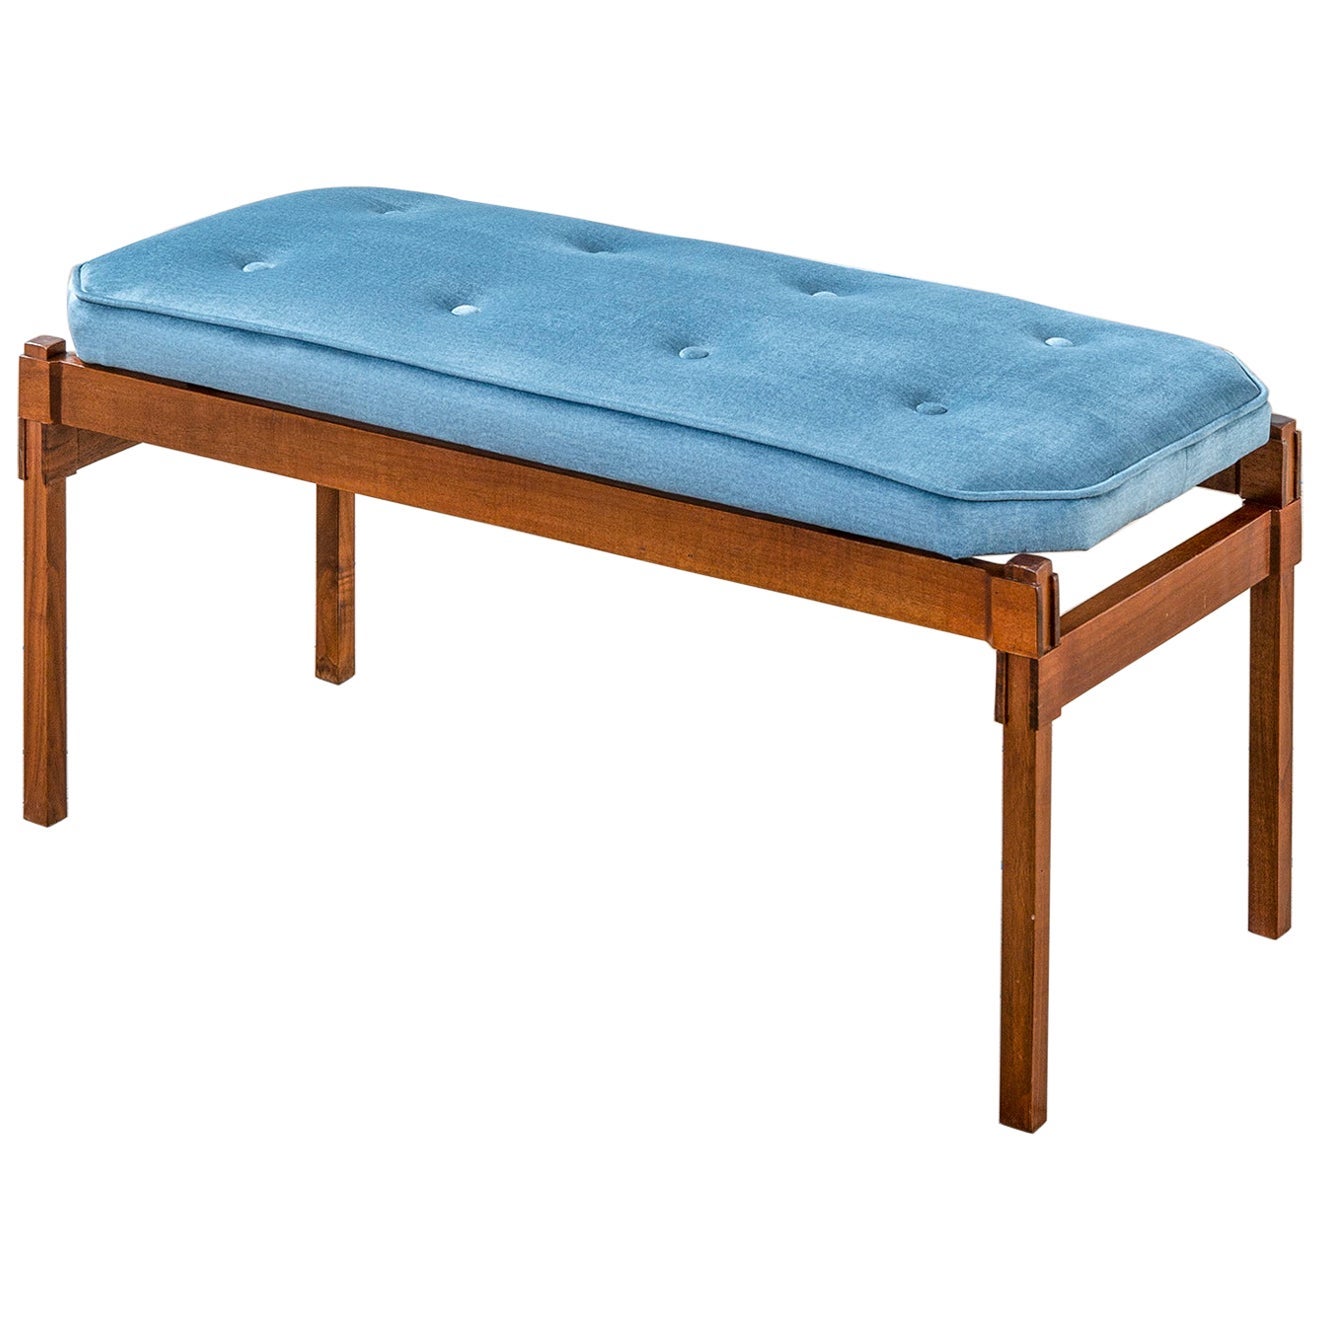 20th Century Ico Parisi Bench with Wooden Structure and Fabric Seating, Blue